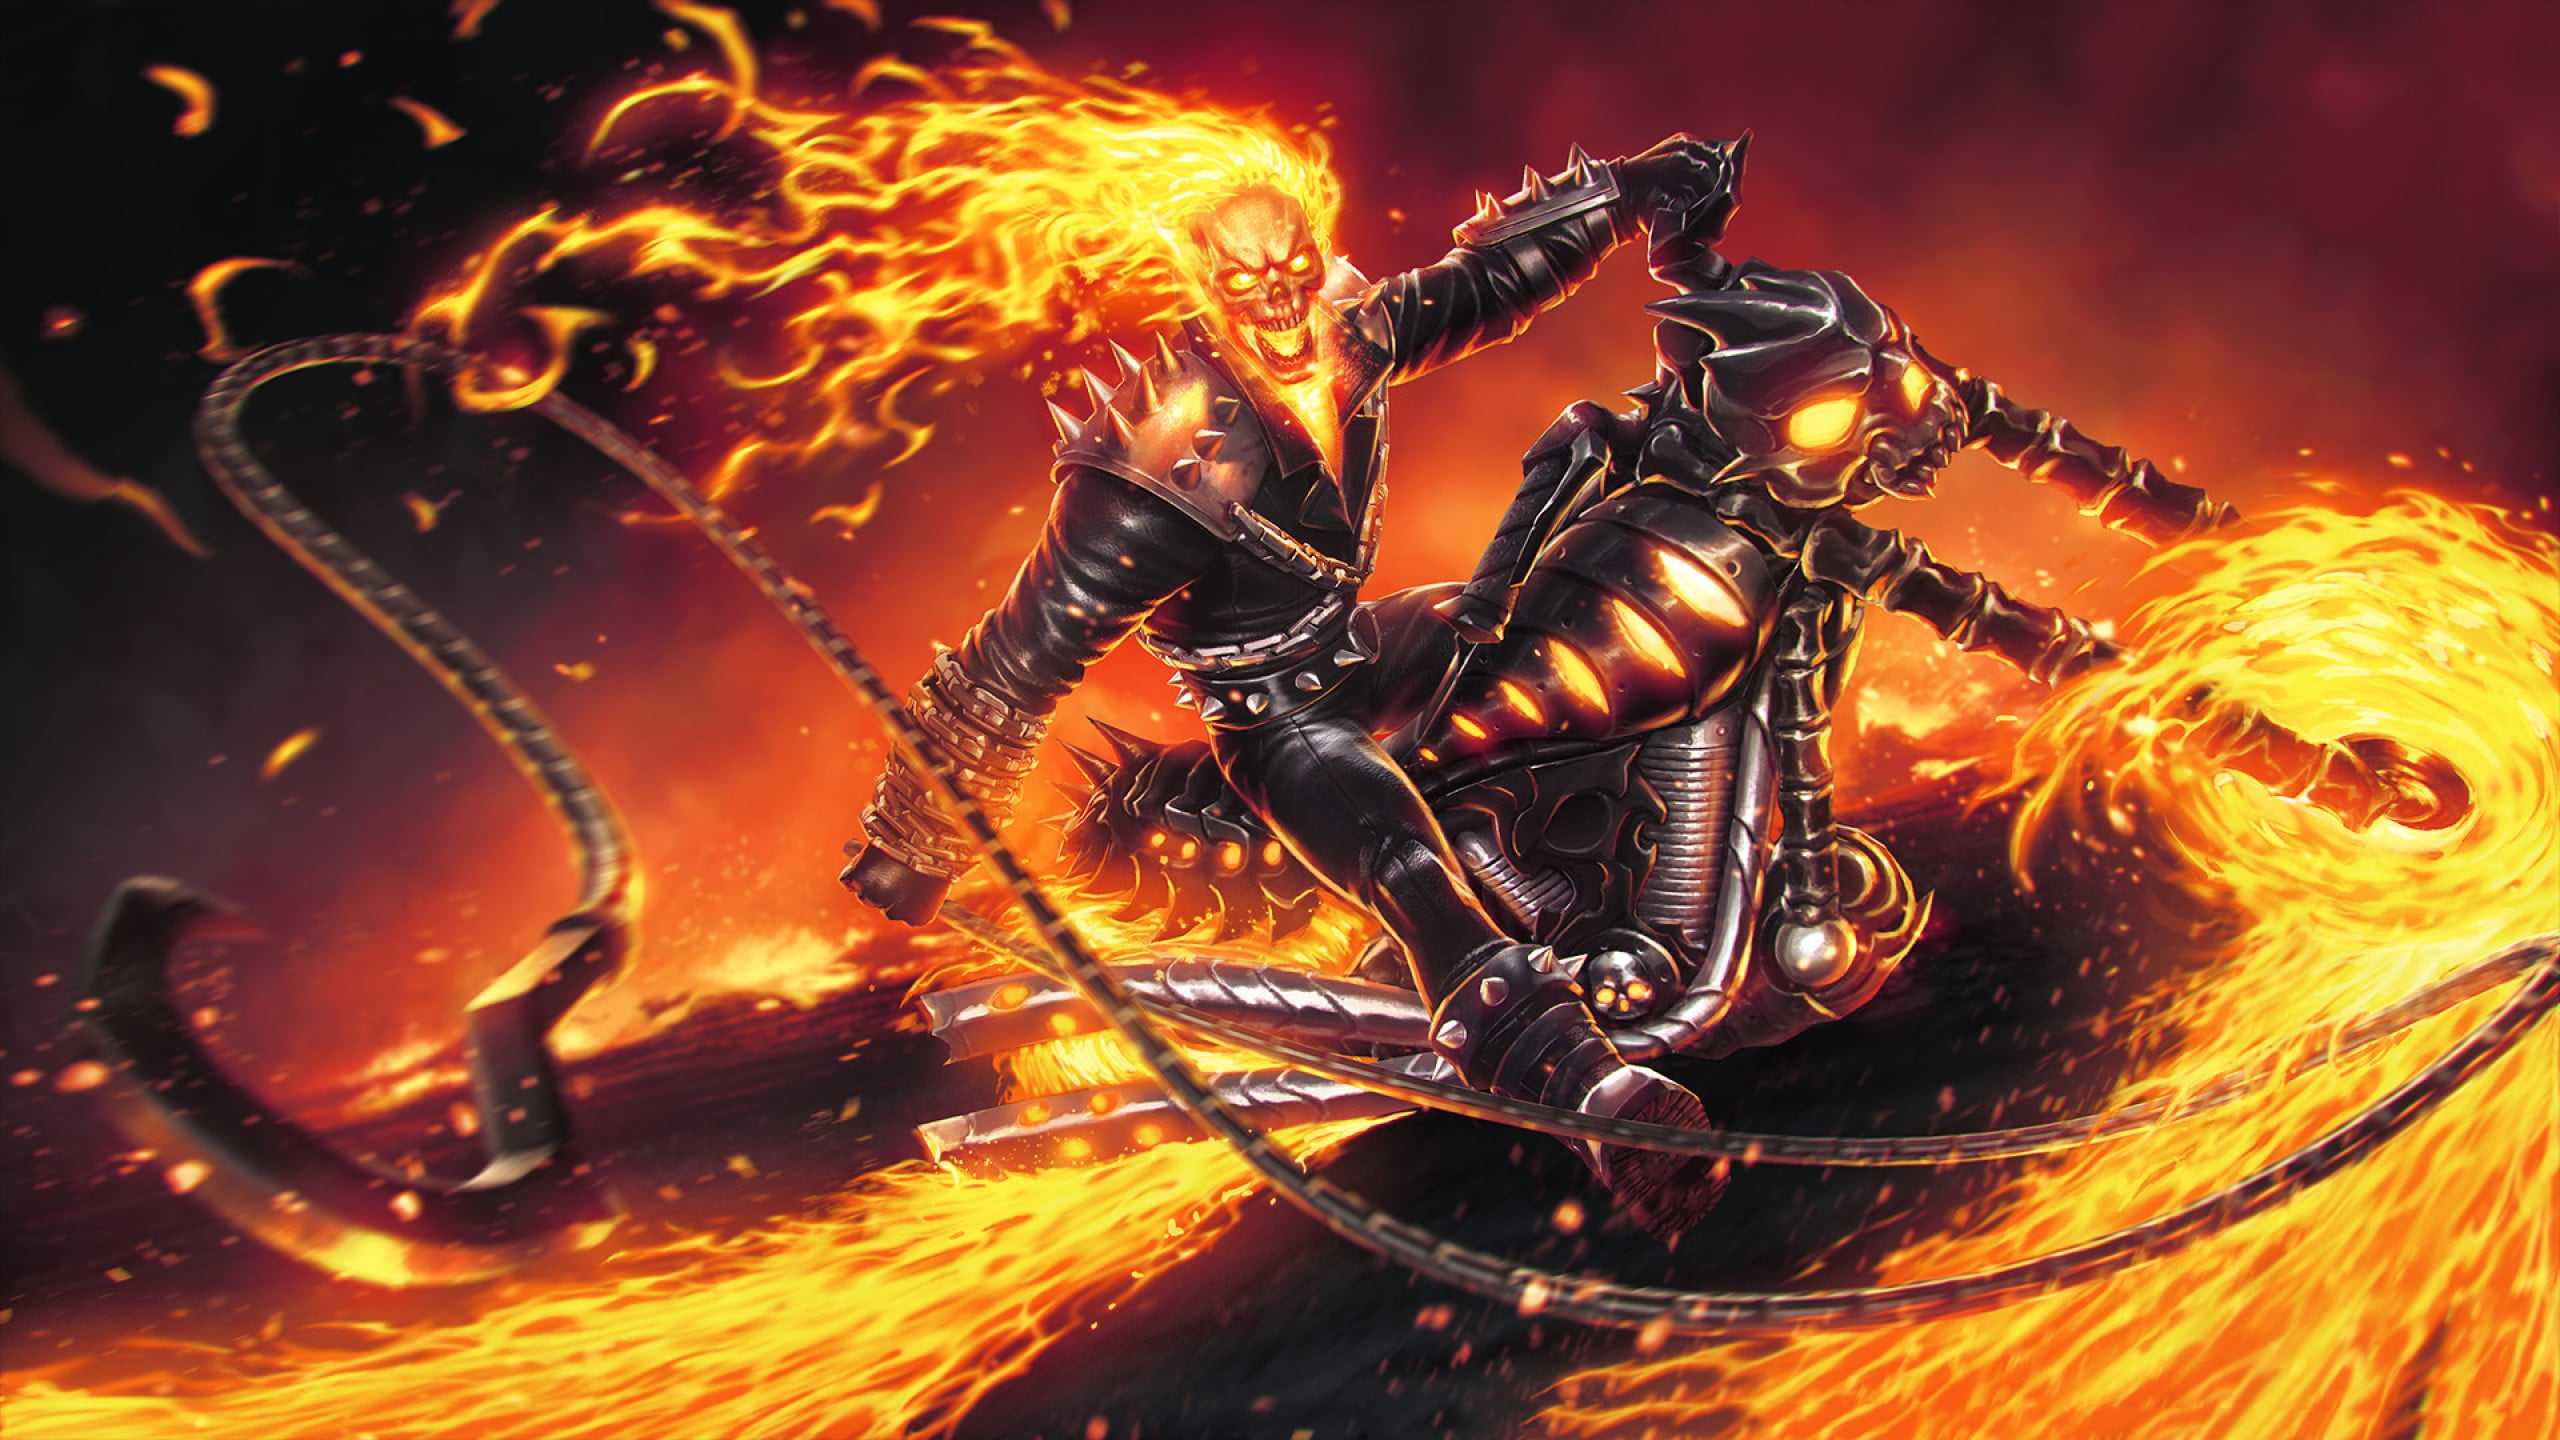 View Ghost Rider Desktop Background Most Complete Collection Of Desktop Background